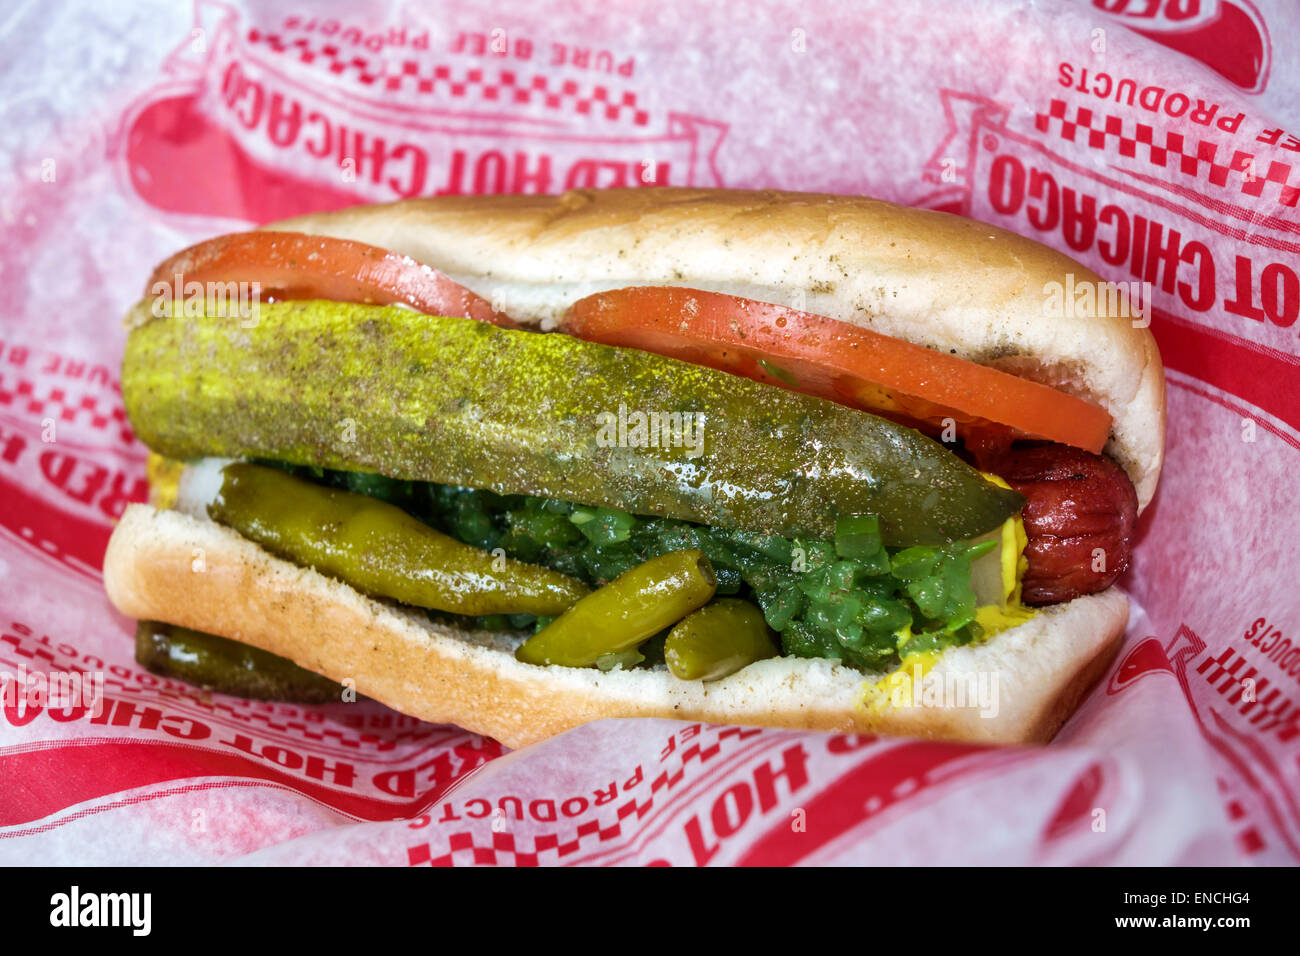 Chicago Illinois,North Side,Lincoln Park,West Fullerton Avenue,neighborhood,Chicago's Dog House,restaurant restaurants food dining cafe cafes,dining,h Stock Photo